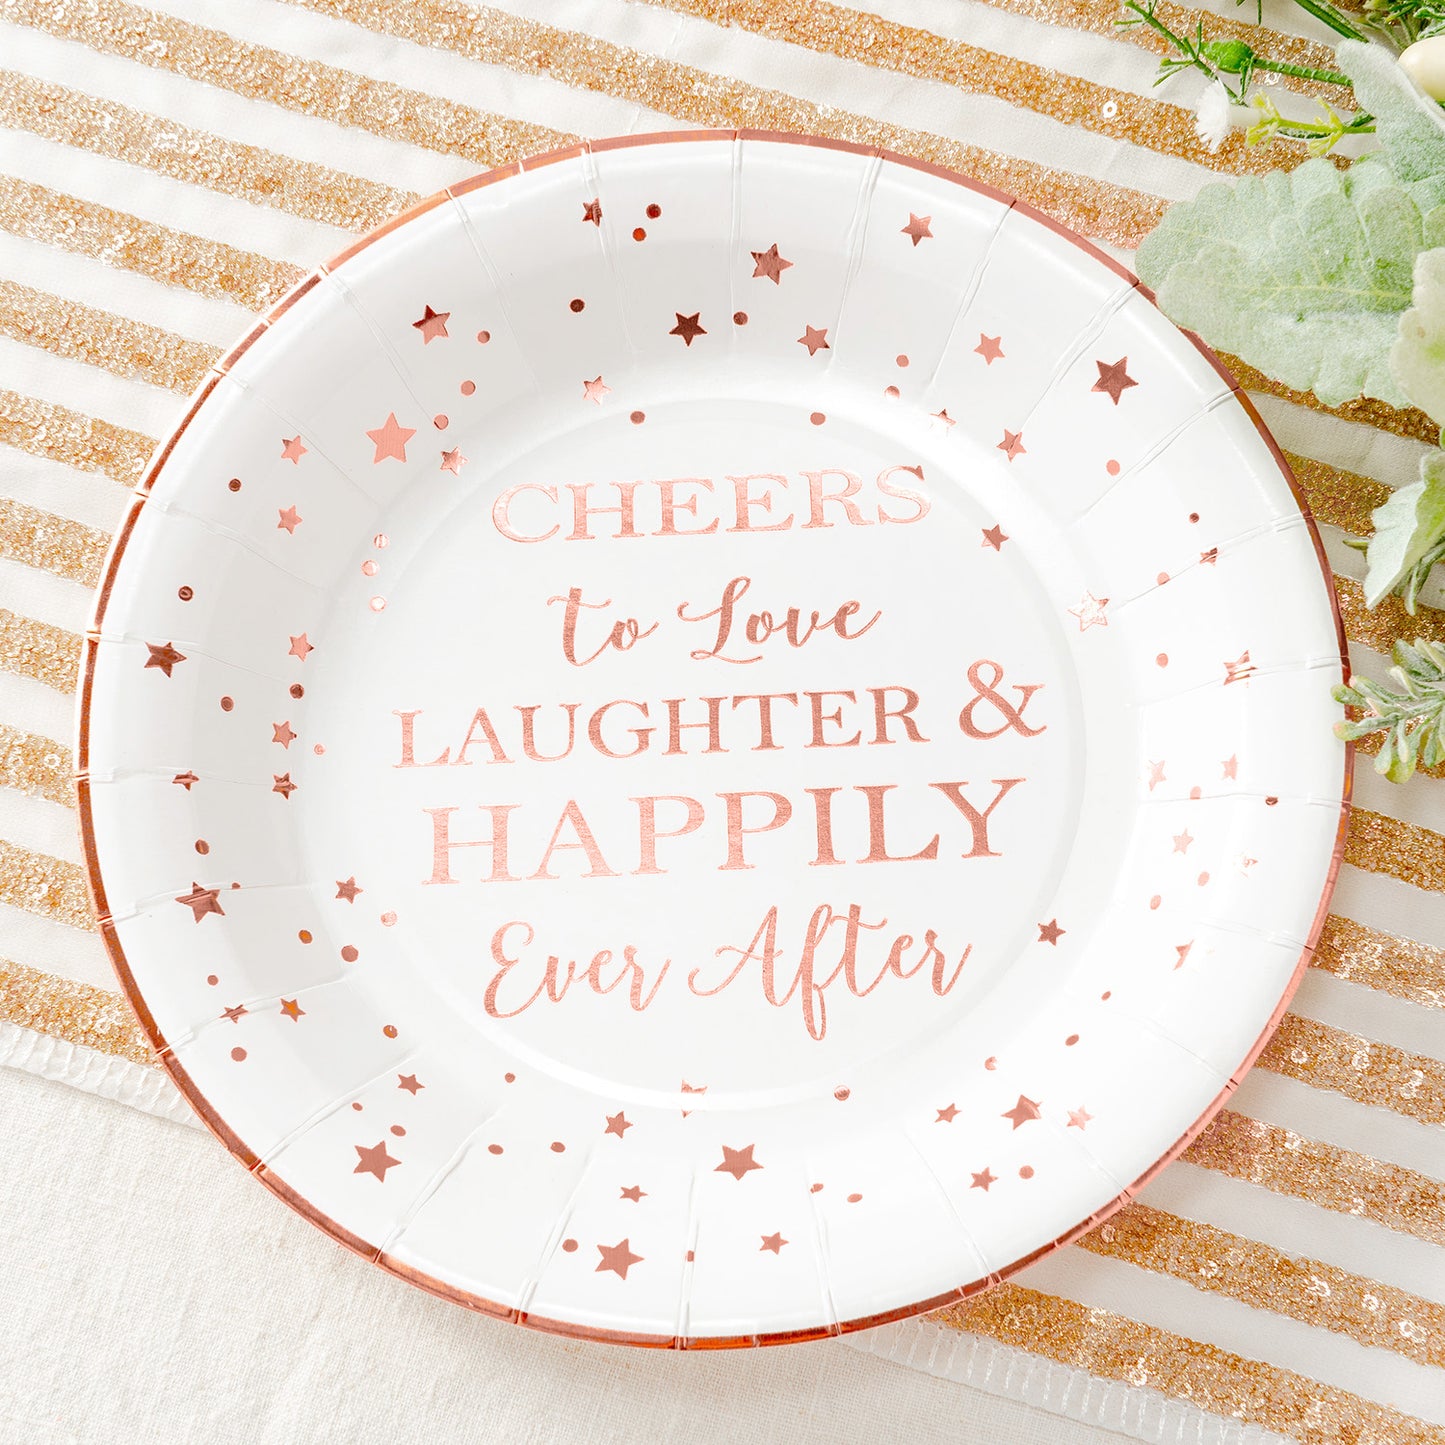 Crisky Cheers to Love Rose Gold Disposable Plates for Bridal Shower, Wedding, Engagement, Bachelorett Party Decorations, Dessert, Buffet, Cake, Lunch, Dinner Plates Party Supples, 50 Count, 9" Plate